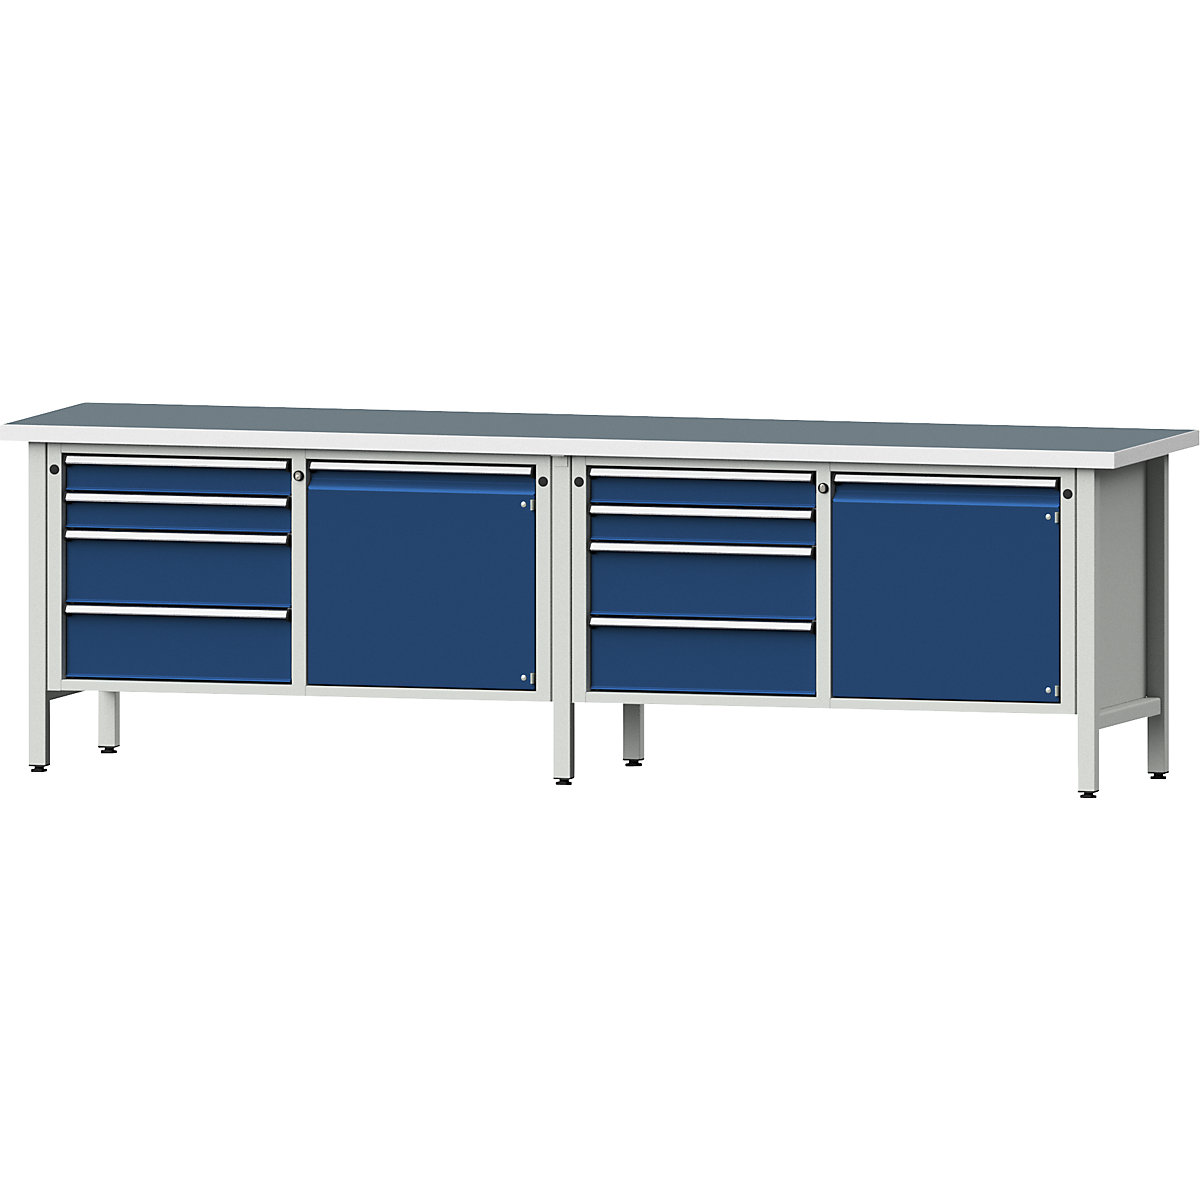 Workbench width 2800 mm, frame construction – ANKE, 2 doors, 8 drawers with partial extension, universal worktop-10